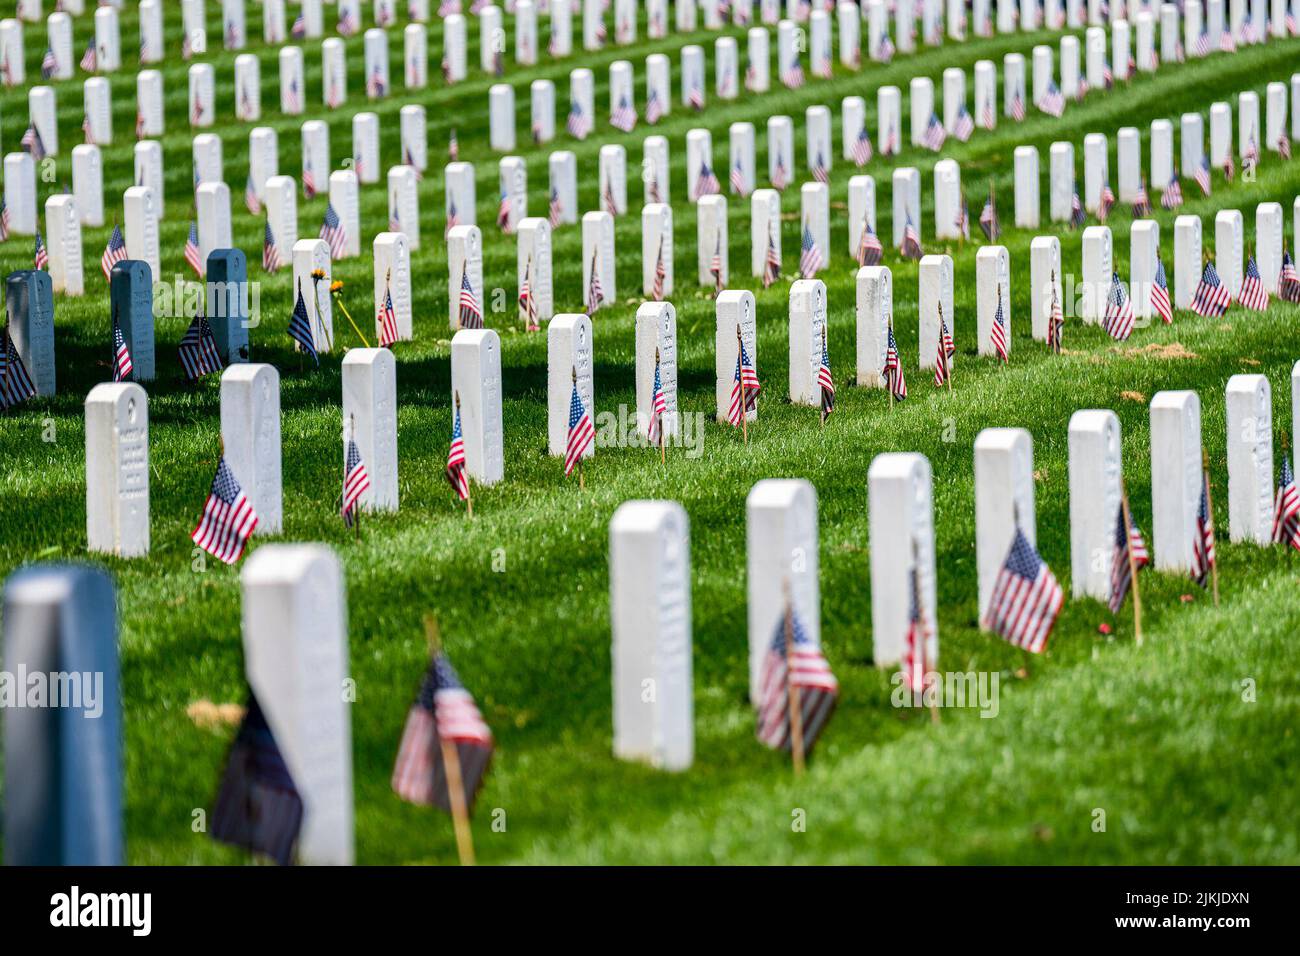 American flags line Arlington National Cemetery on Monday, May 30, 2022, as President Joe Biden and First Lady Jill Biden arrive for Memorial Day ceremonies.  (Official White House Photo by Adam Schultz) Arlington National Cemetery is a United States military cemetery in Arlington County, Virginia, across the Potomac River from Washington, D.C., in whose 639 acres the dead of the nation's conflicts have been buried, beginning with the Civil War, as well as reinterred dead from earlier wars. The United States Department of the Army, a component of the United States Department of Defense (DoD), Stock Photo